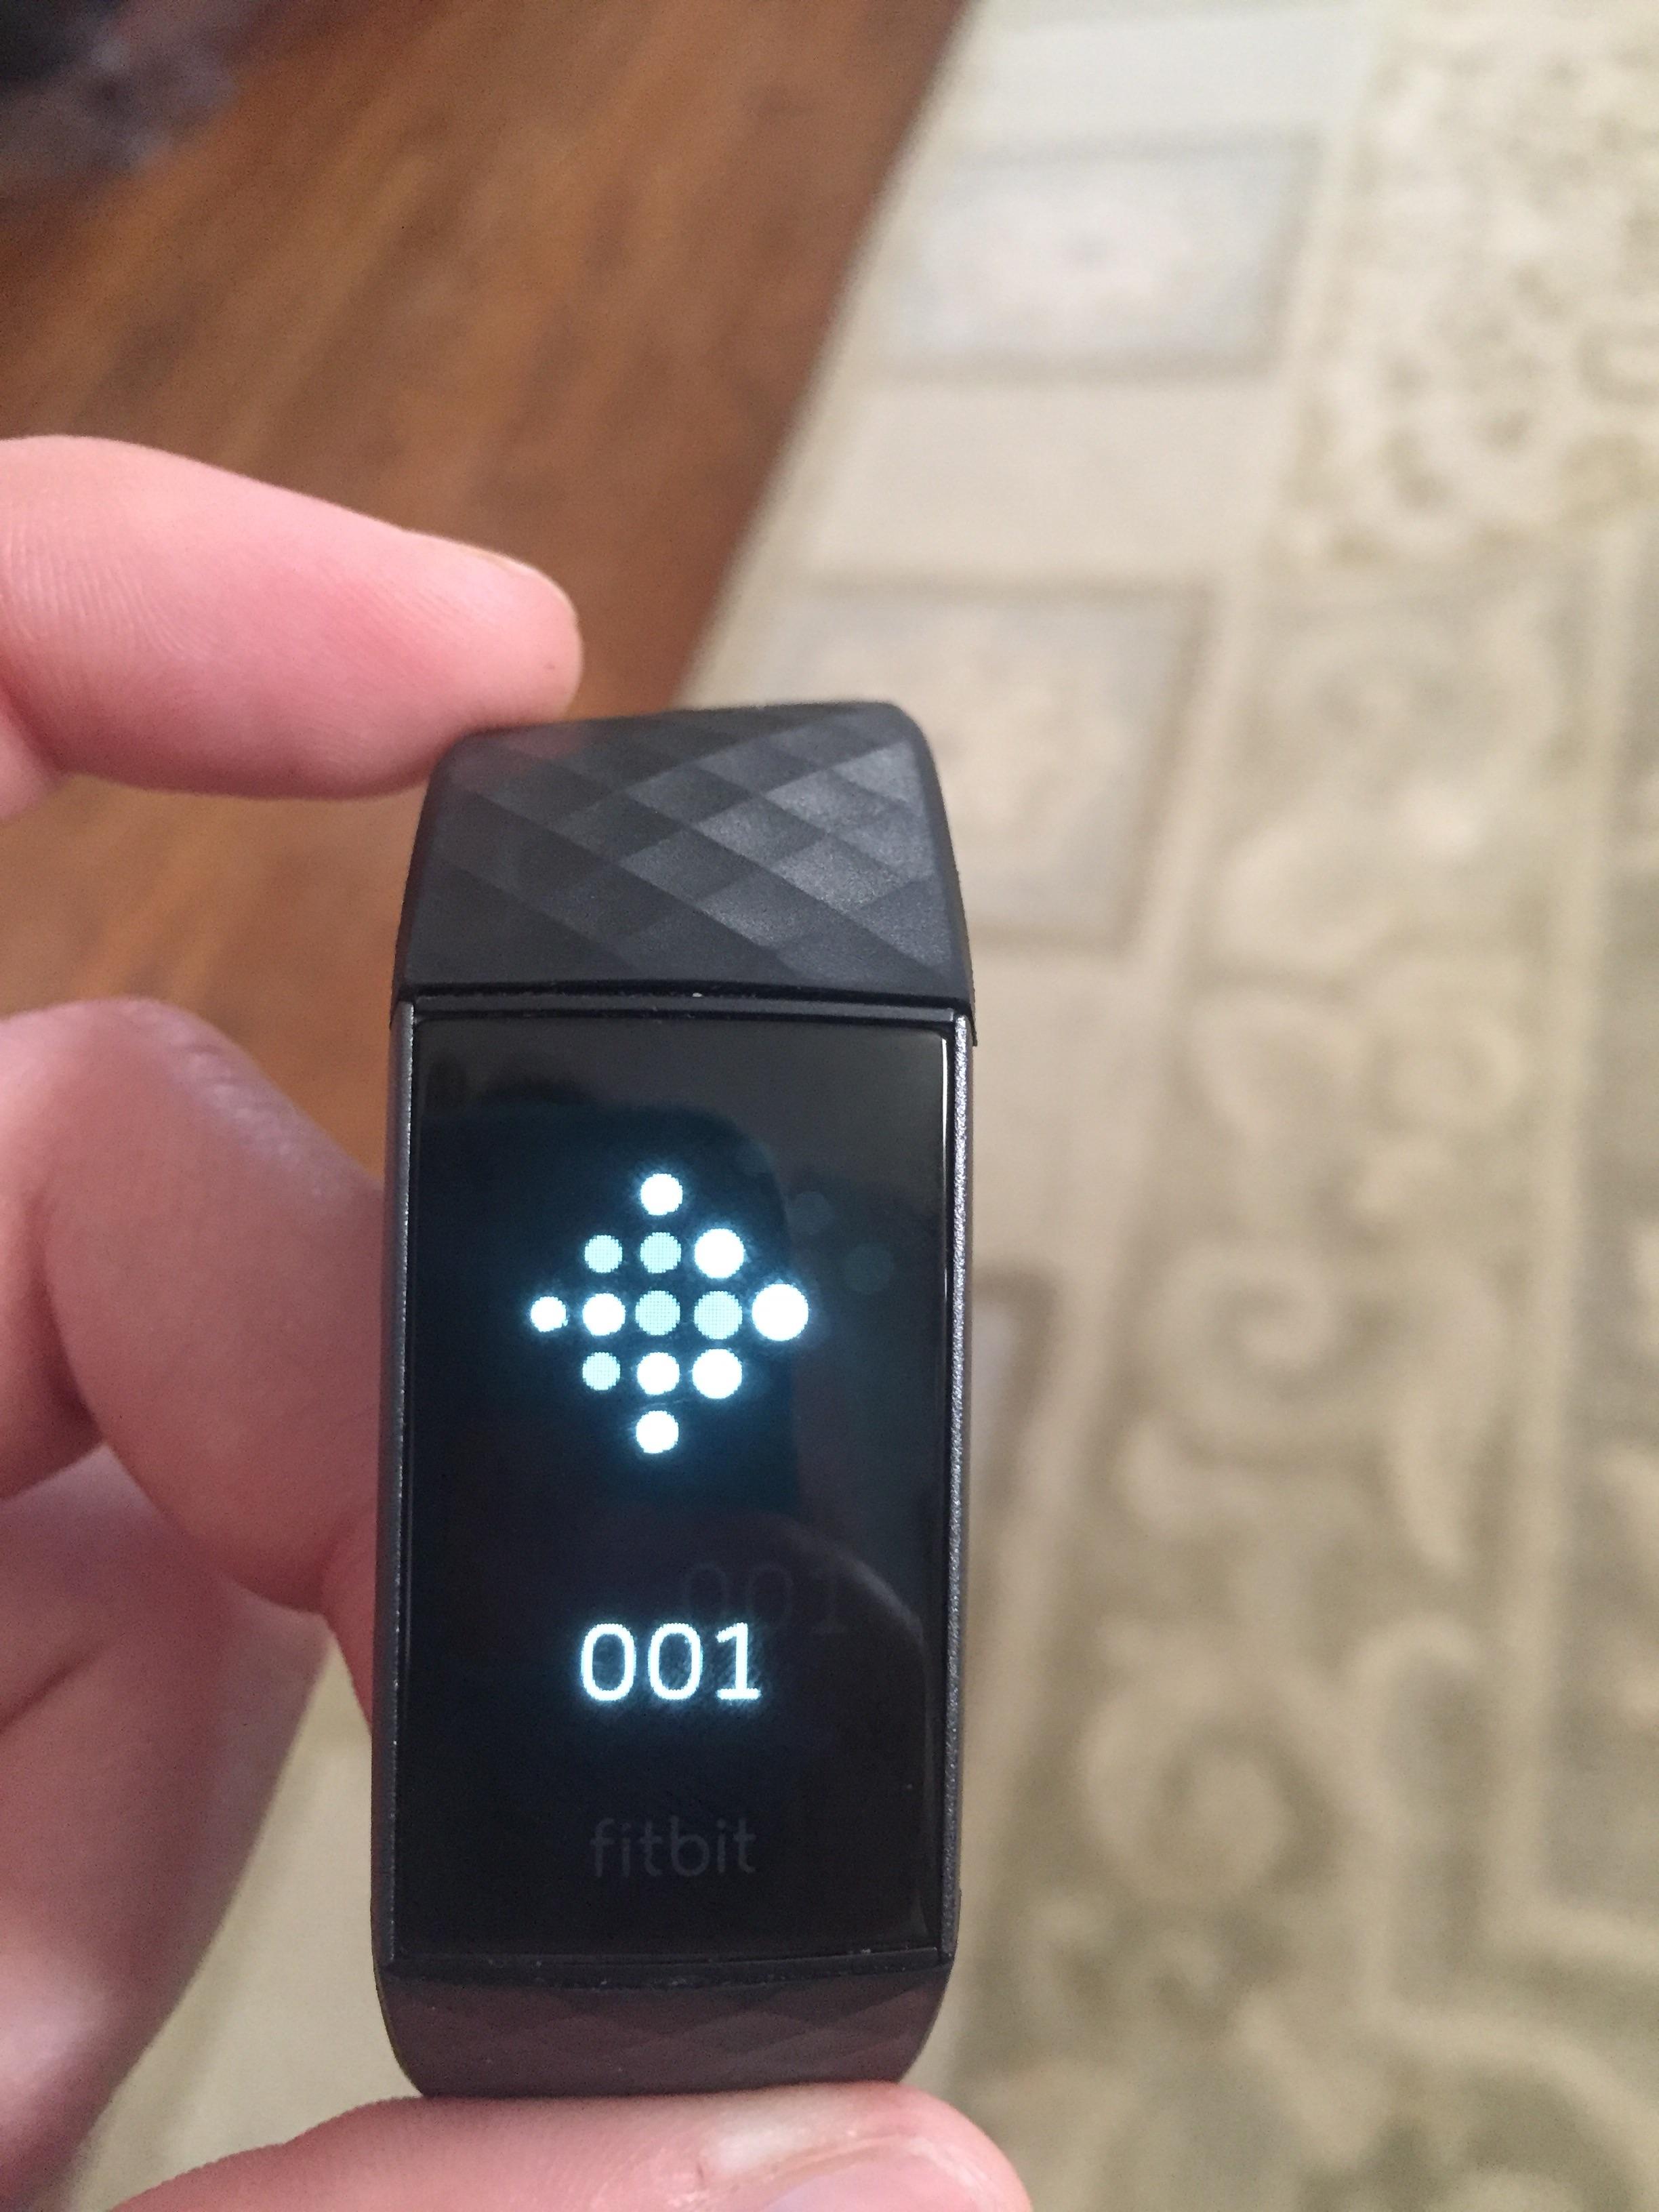 Solved: Charge 3 showing error 001 - Fitbit Community